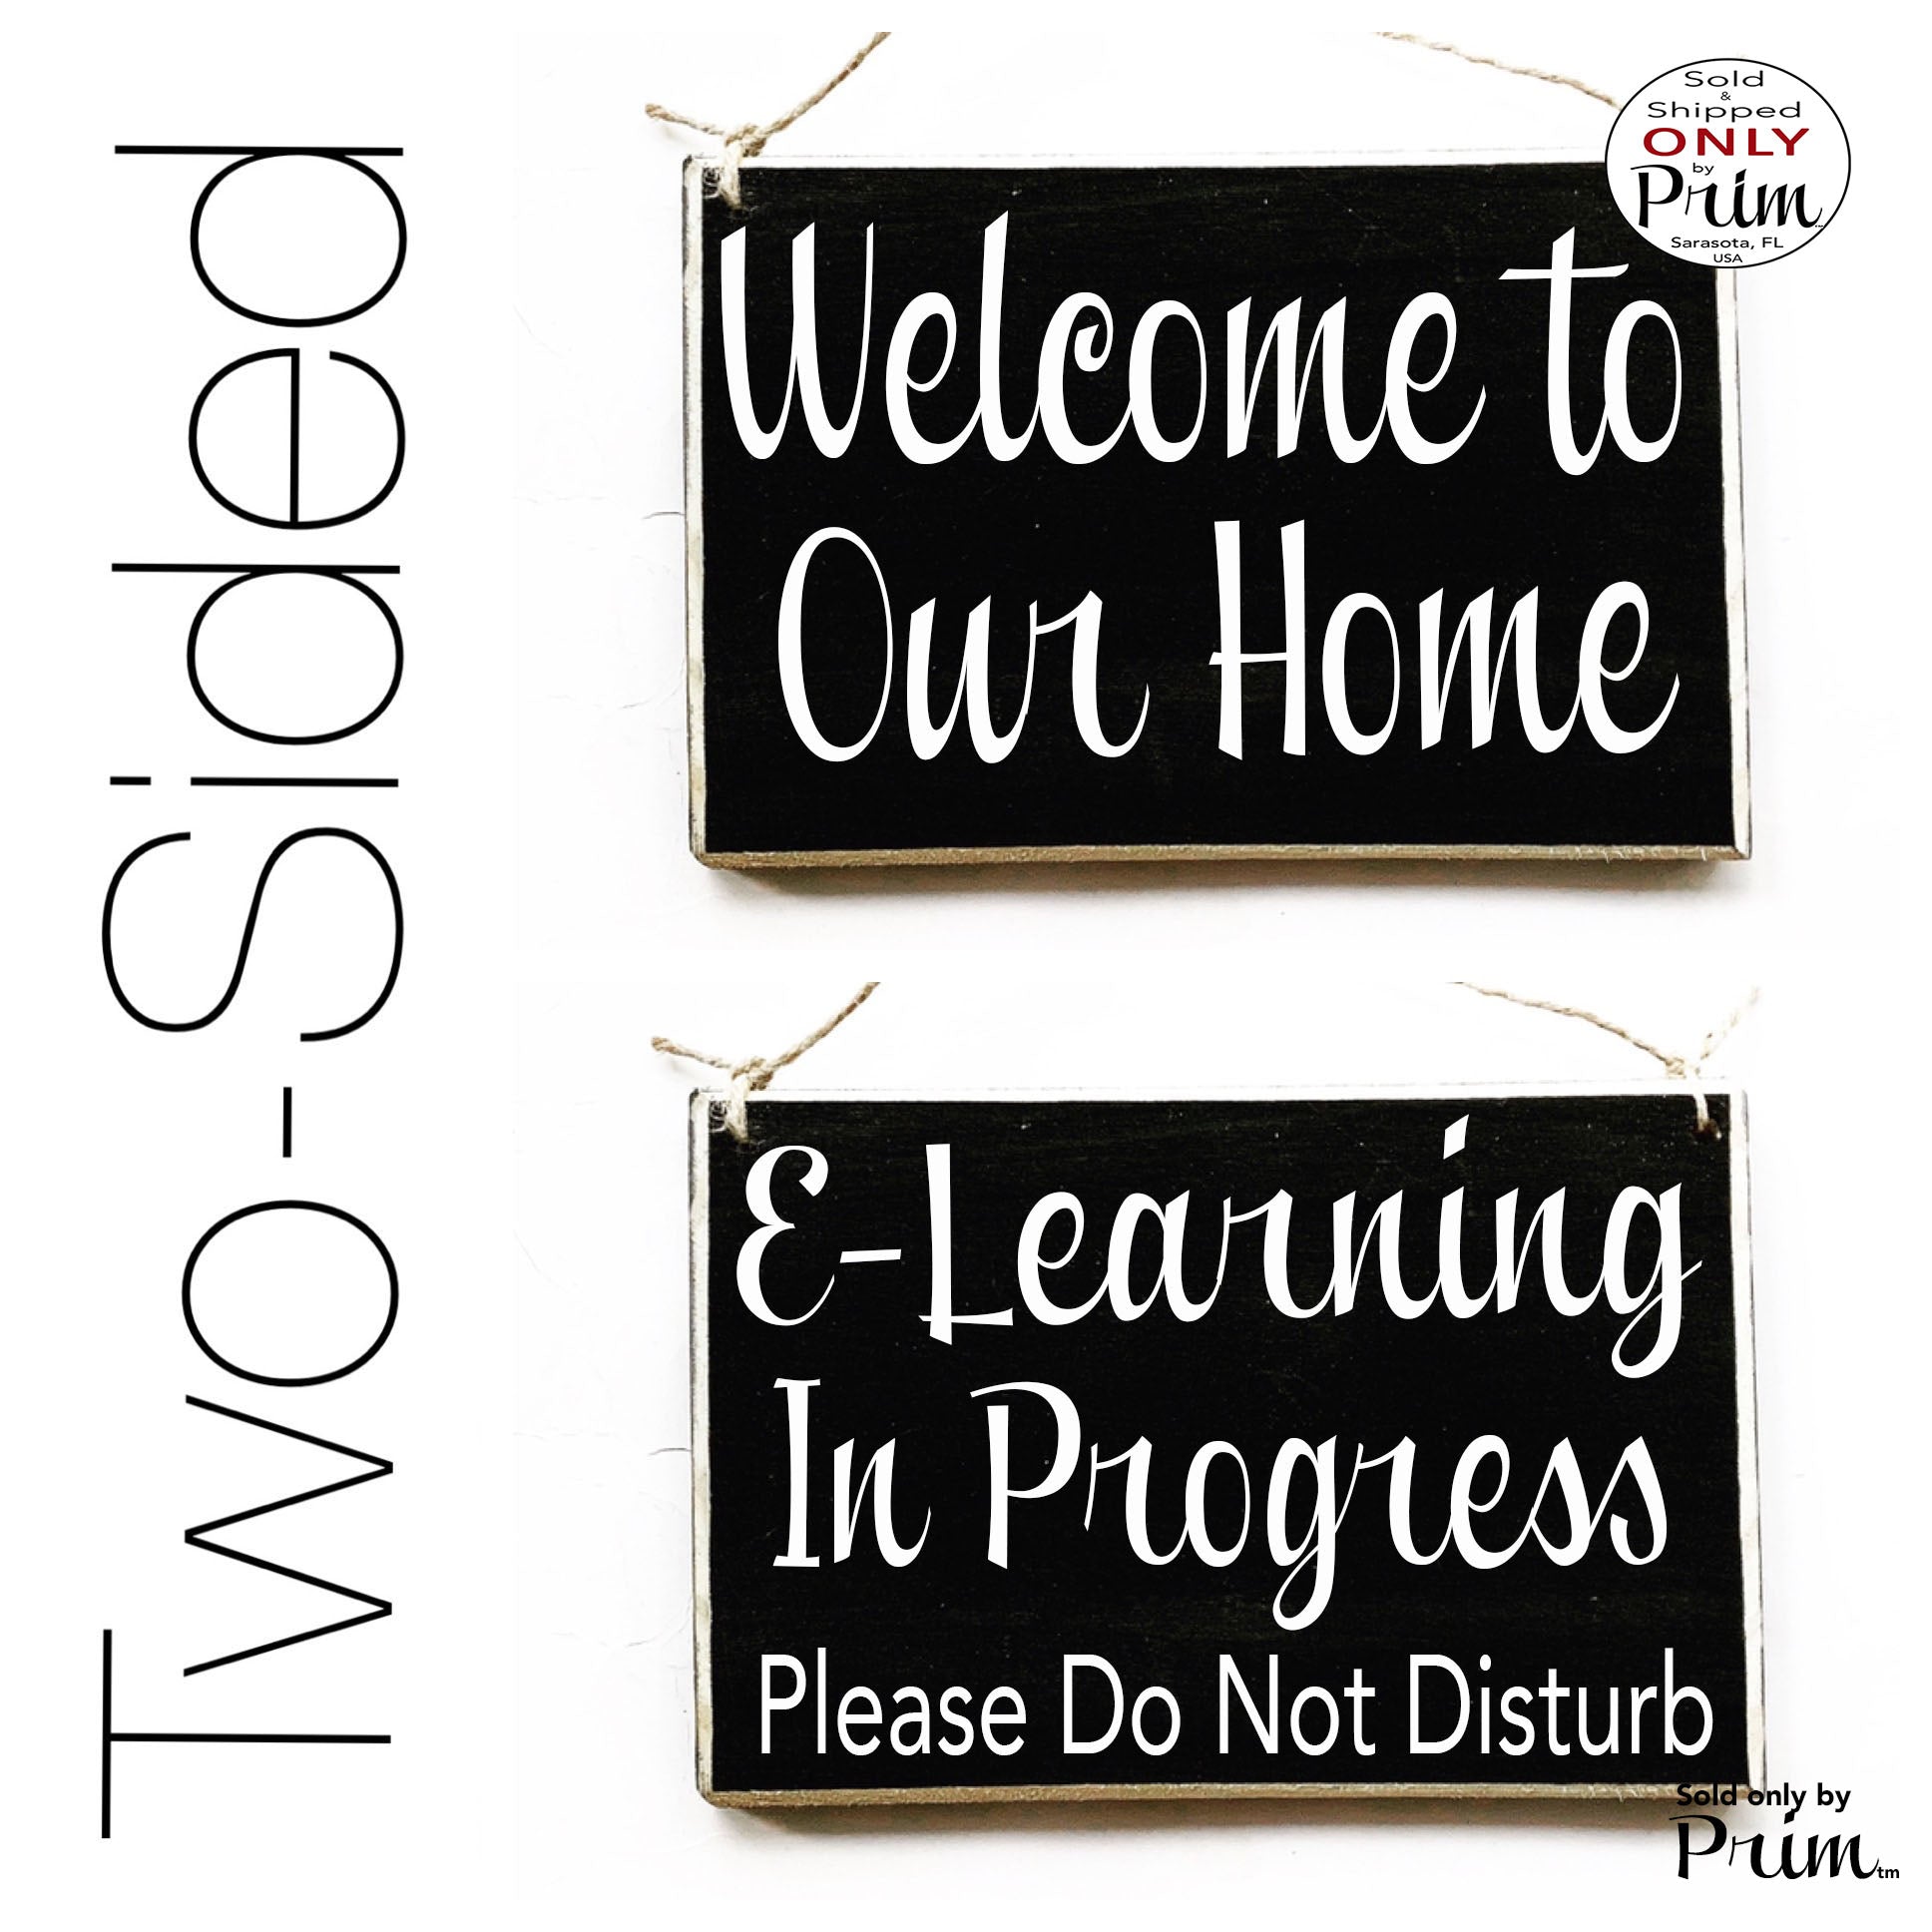 8x6 Welcome to Our Home E-Learning In Progress Please Do Not Disturb Custom Wood Sign Teacher School Students Testing Wall Door Plaque Designs by Prim